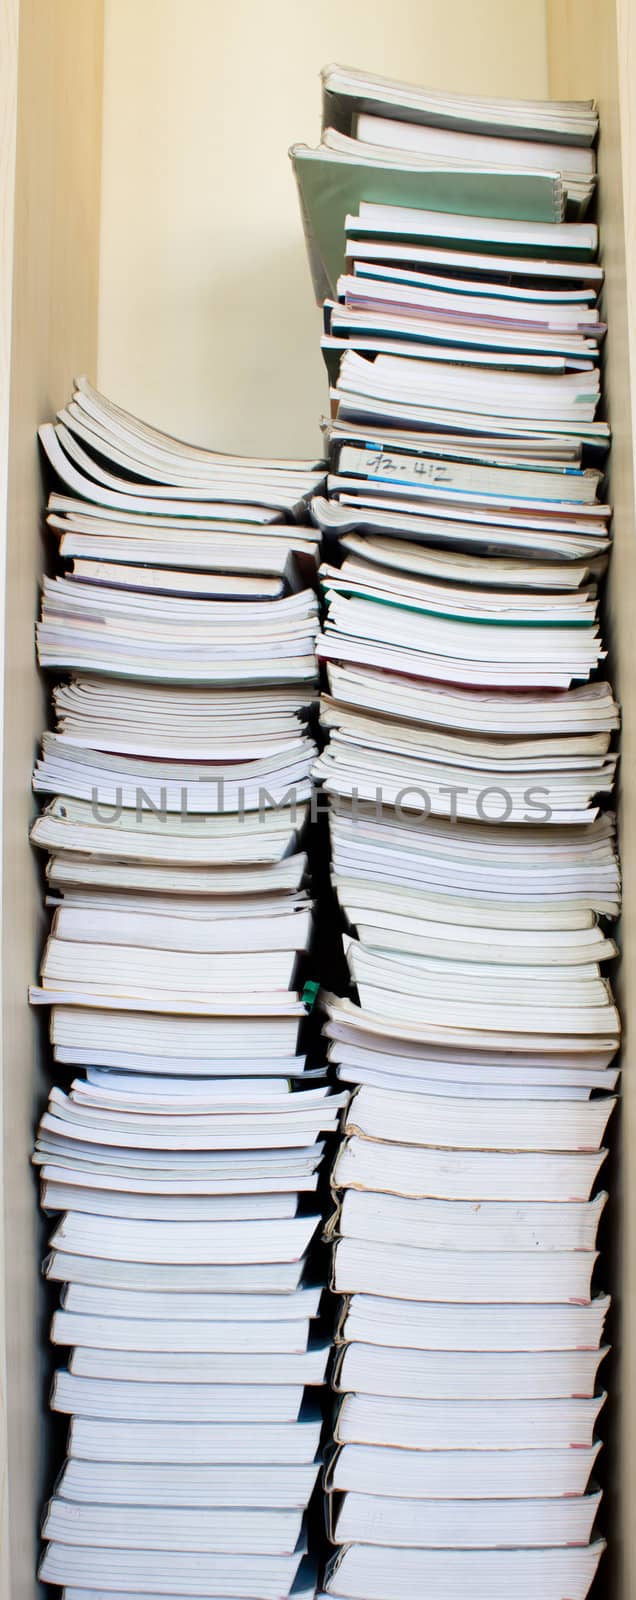 High stack of used books by catalinr